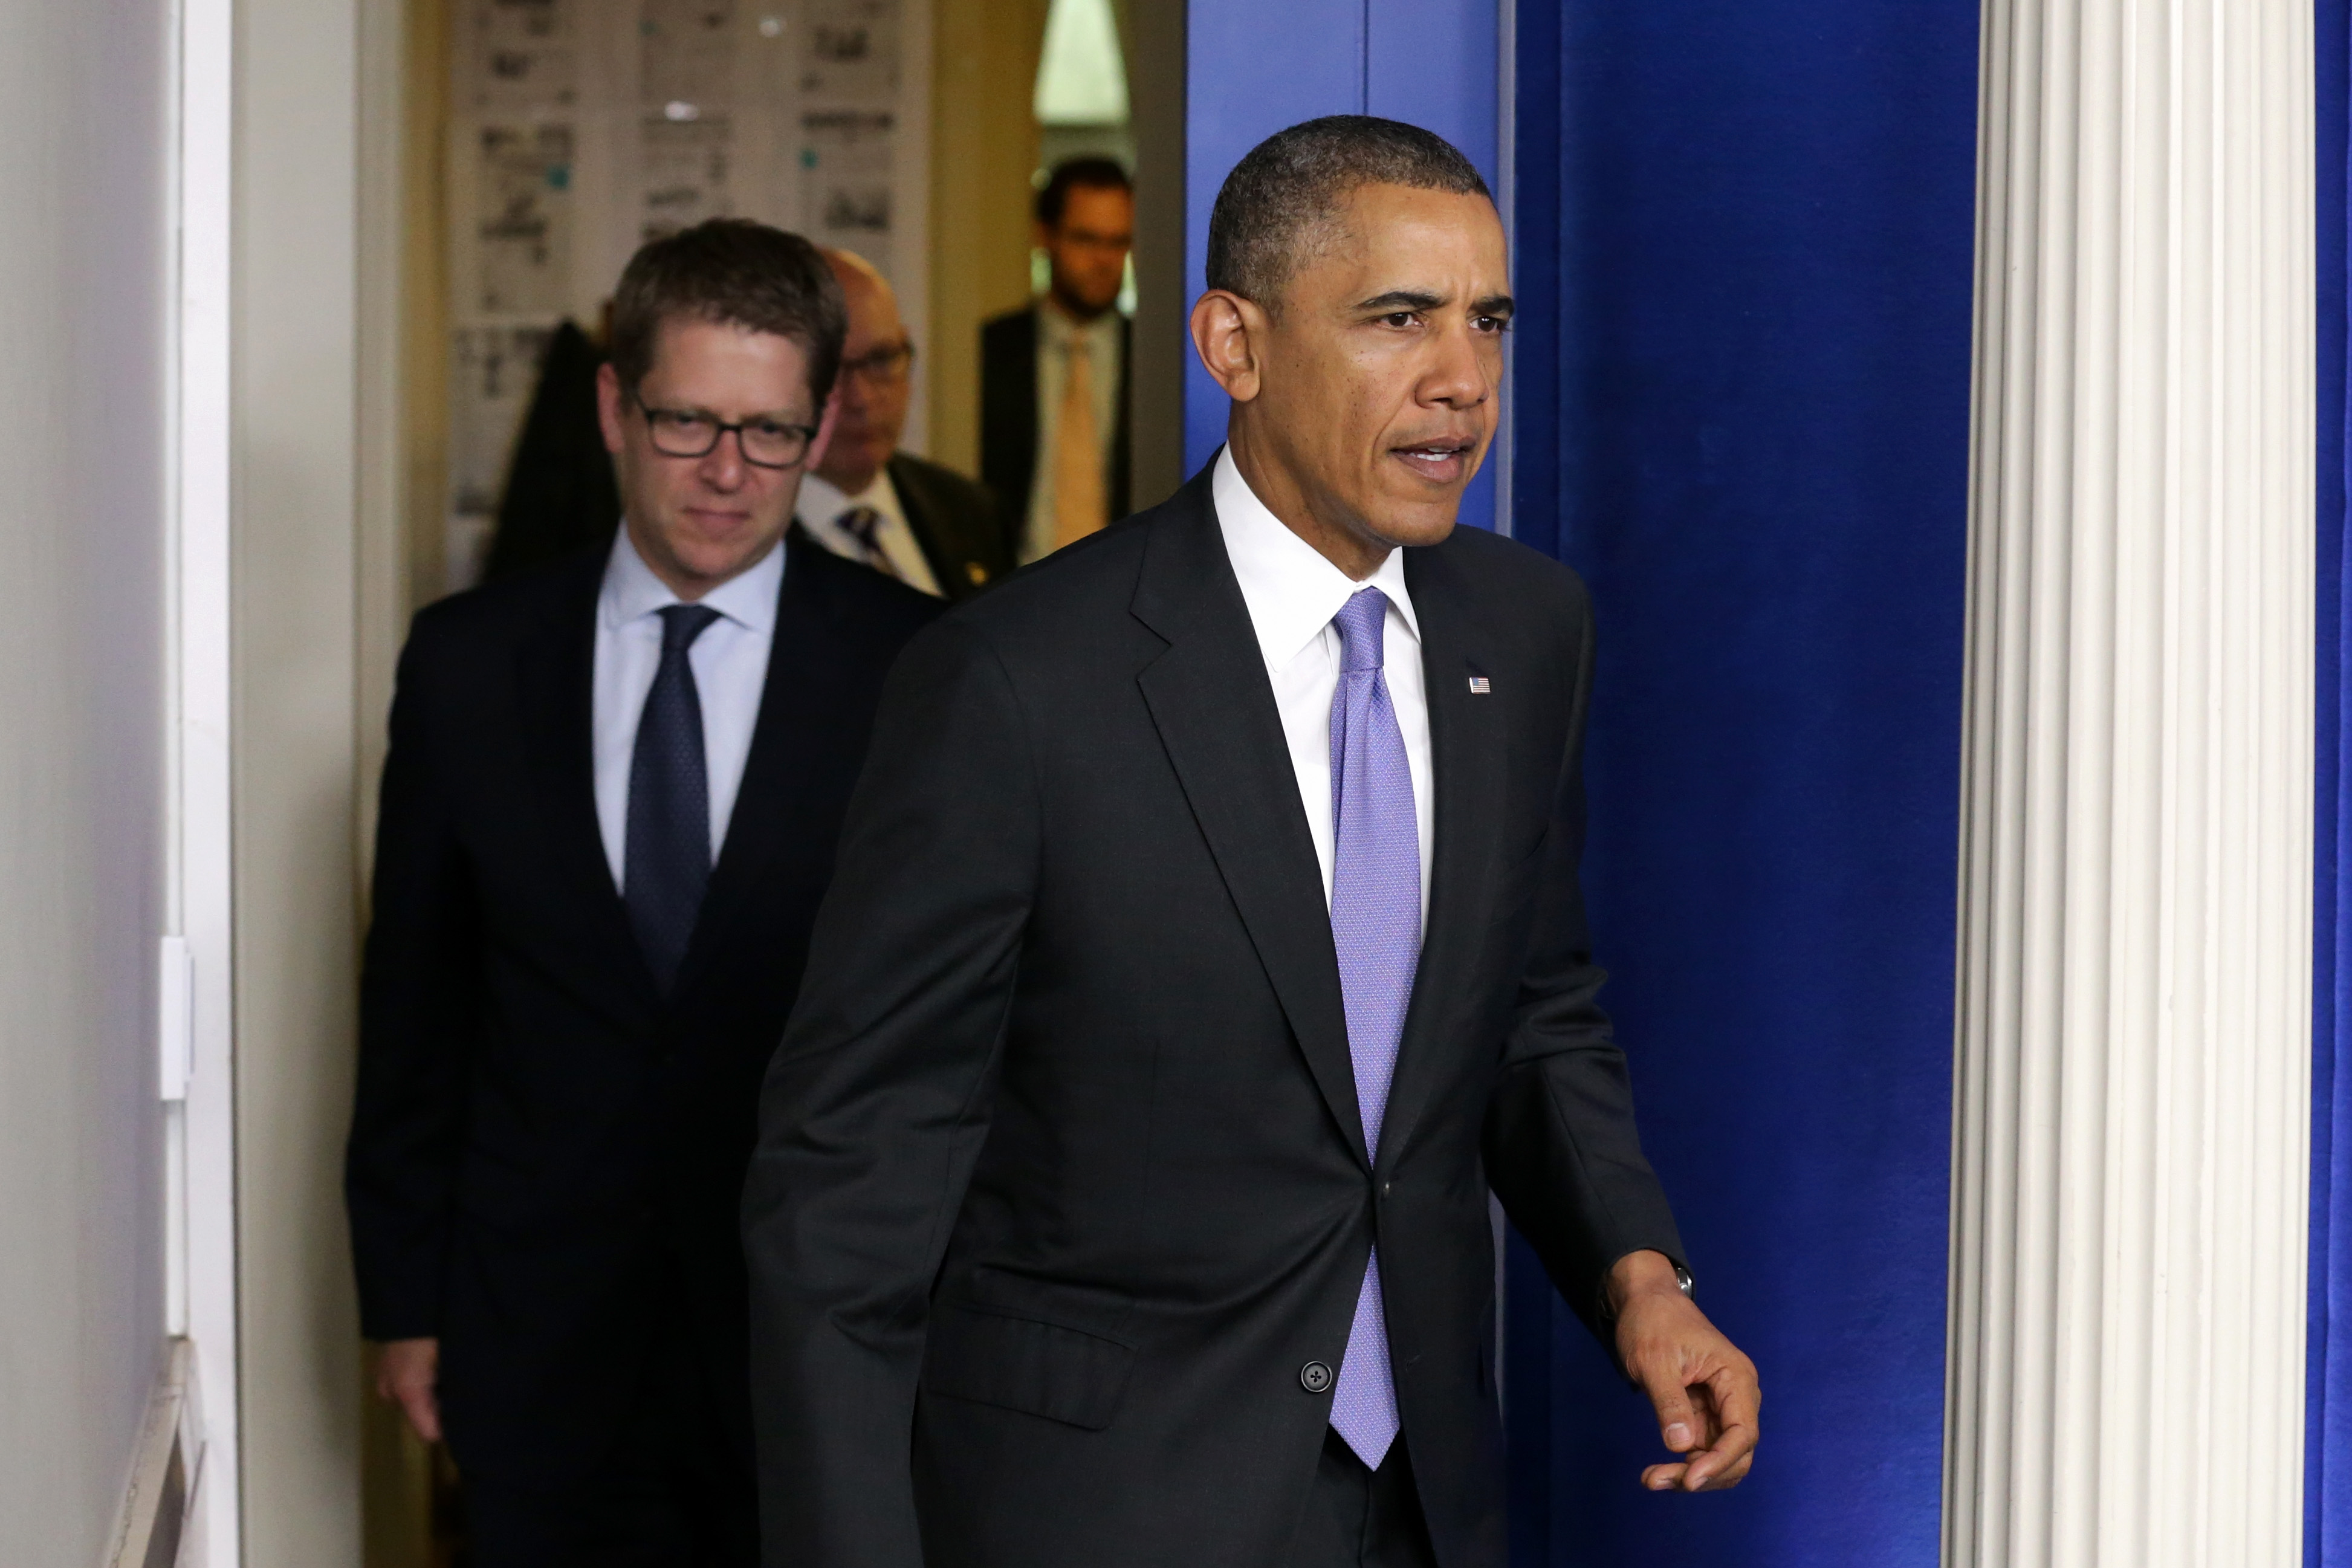 U.S. President Barack Obama (R) arrives to make a statement to the news media about the recent problems at the Veterans Affairs Department with White House Press Secretary Jay Carney in the Brady Press Briefing Room at the White House May 21, 2014 in Washington, DC. (Chip Somodevilla—Getty Images)